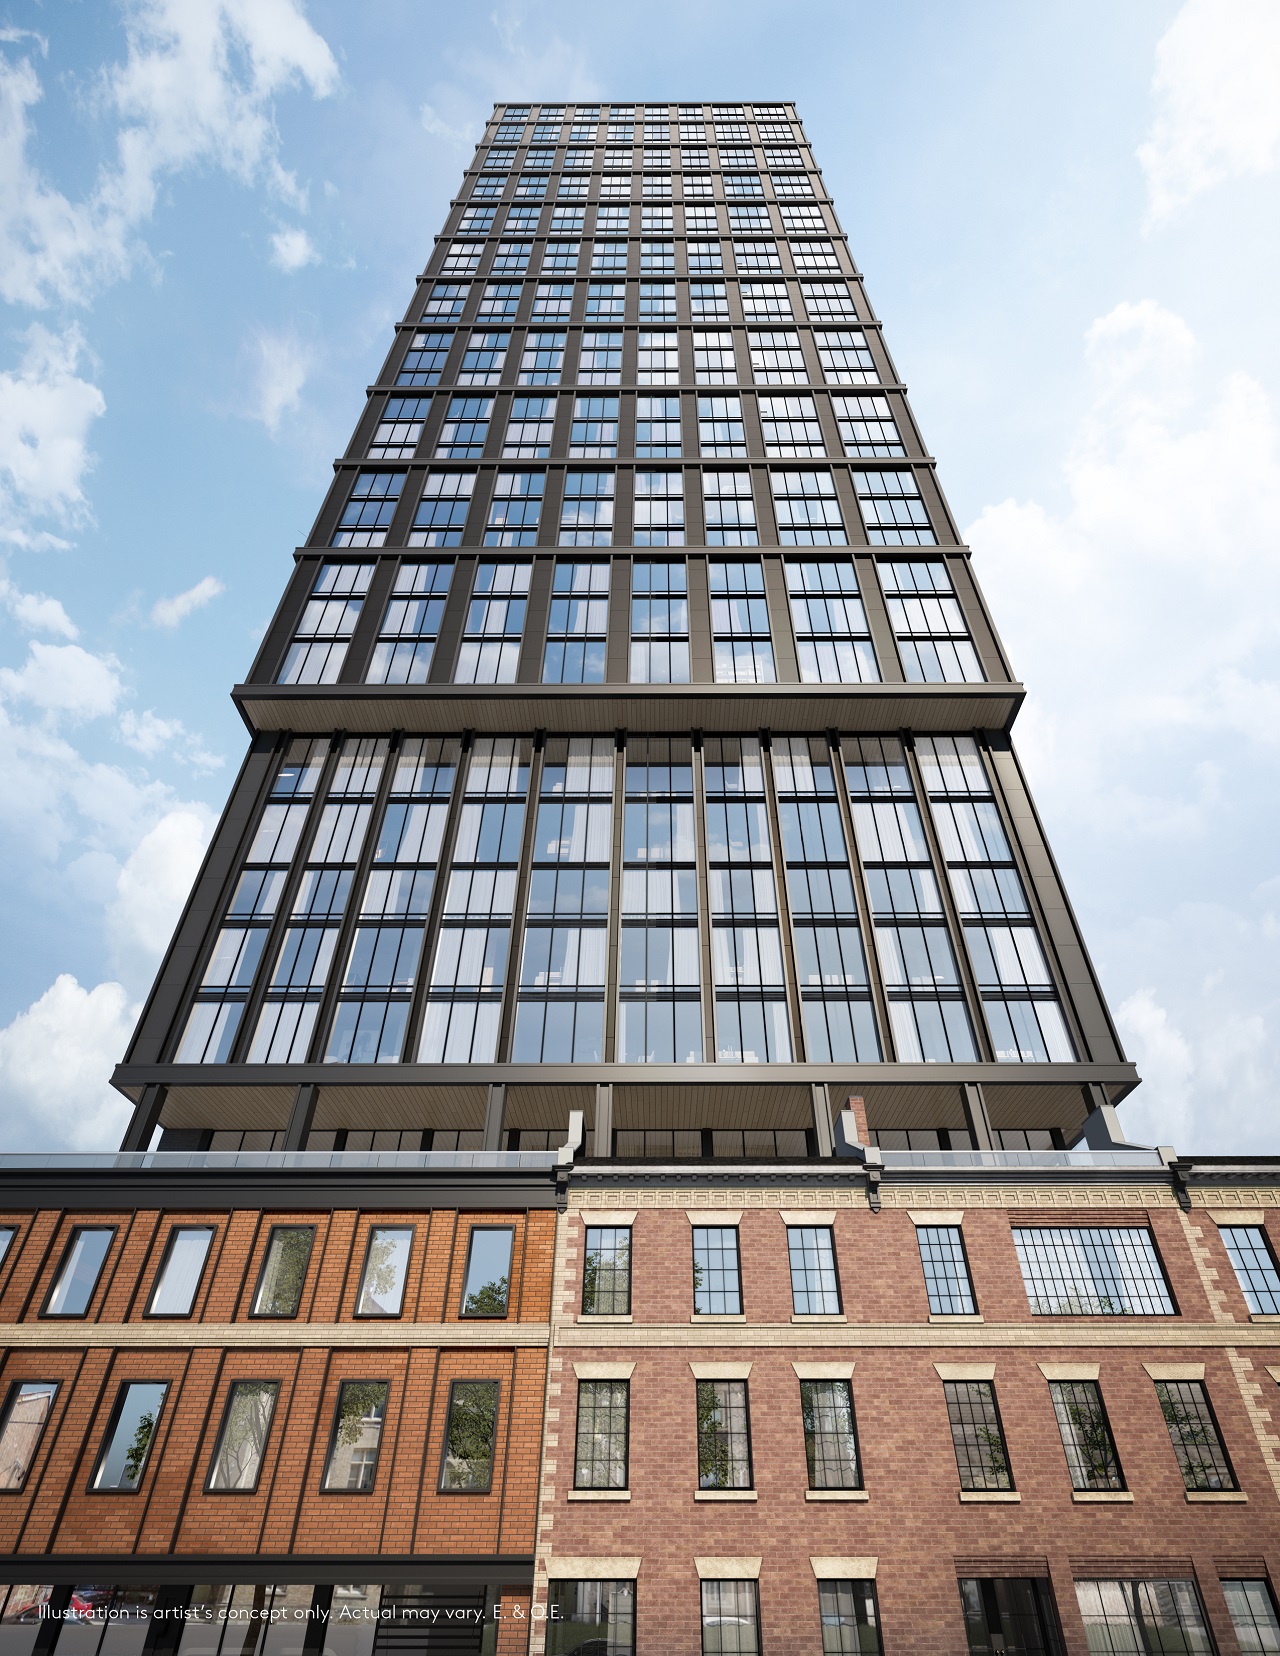 199 Church Bumped to 39 Storeys in Latest Planning Submission ...